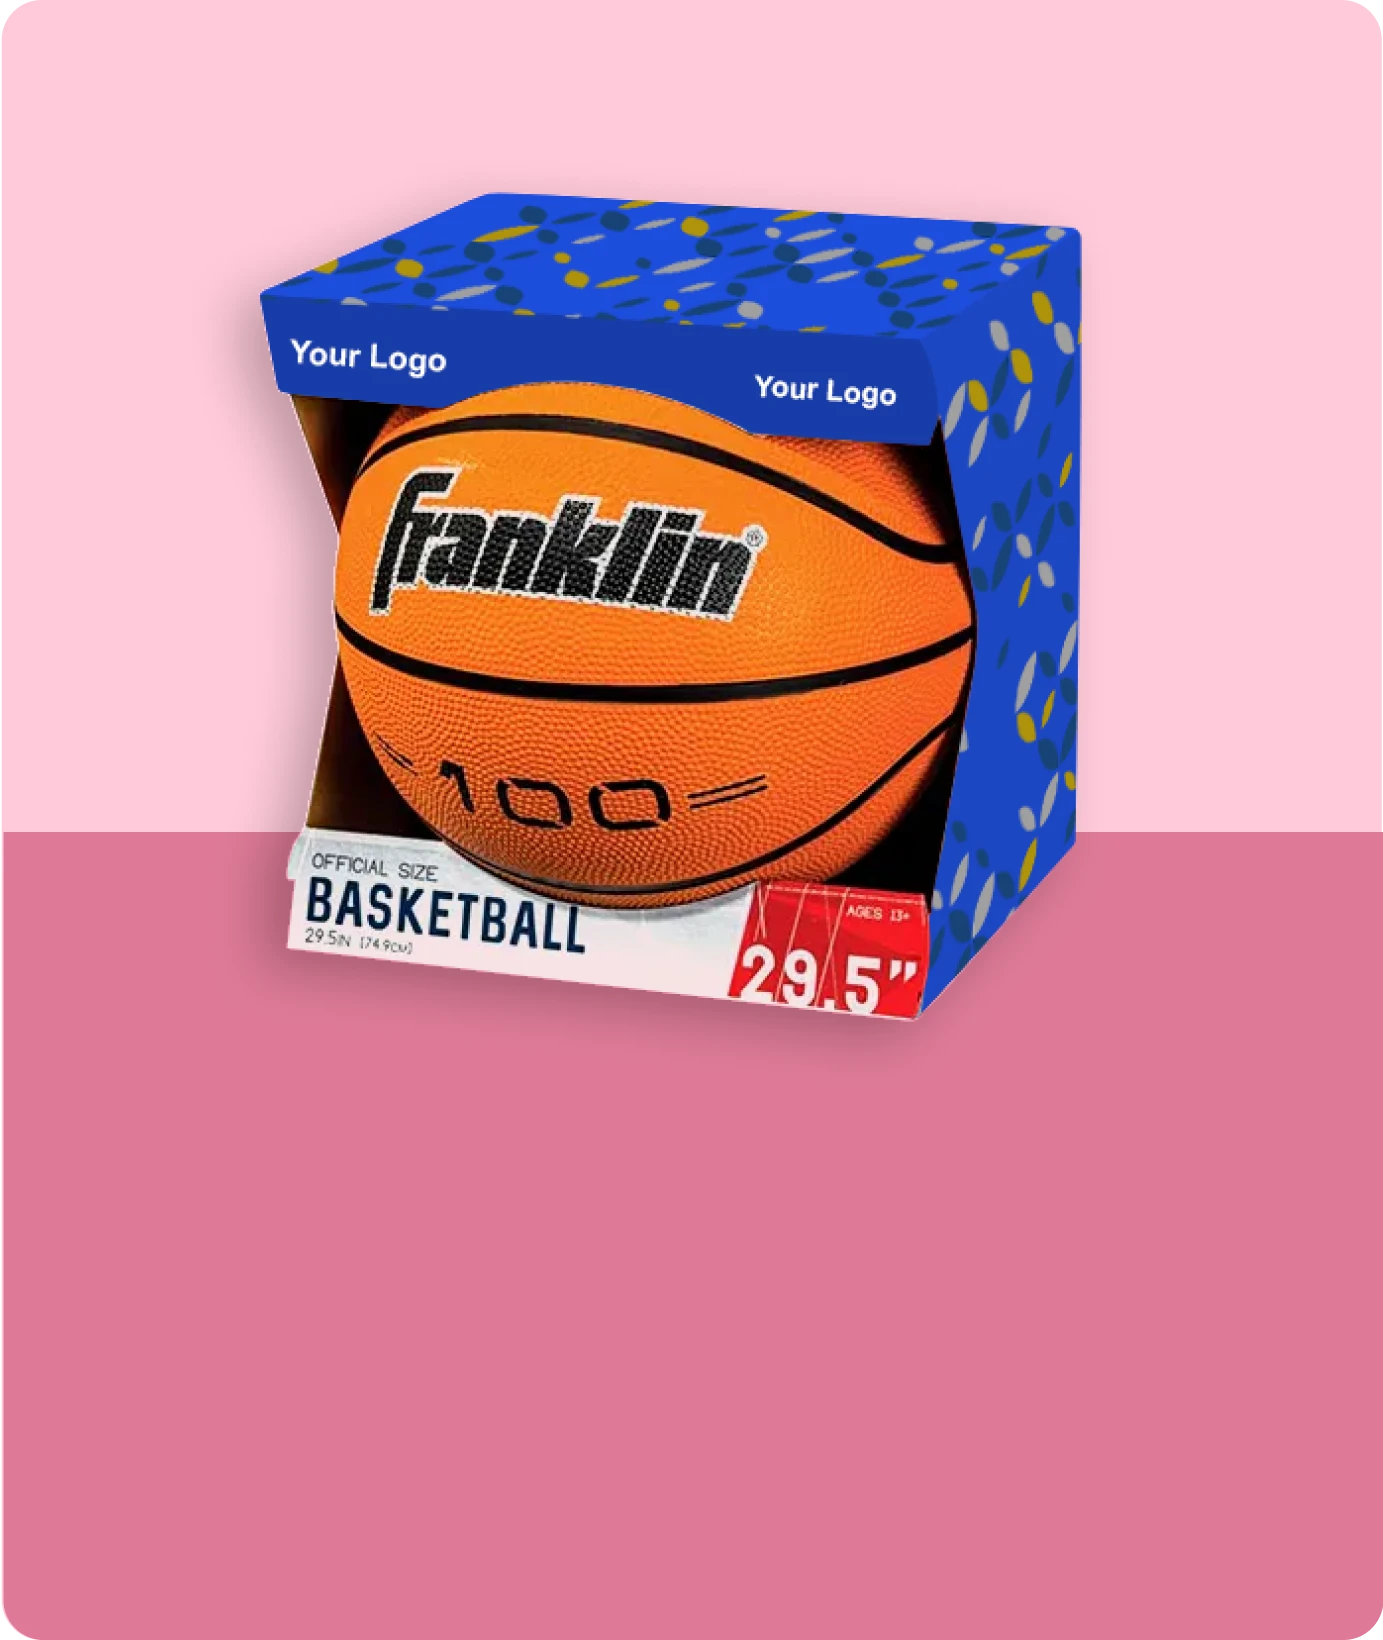 Basket Ball Boxes related product image | The Box Lane